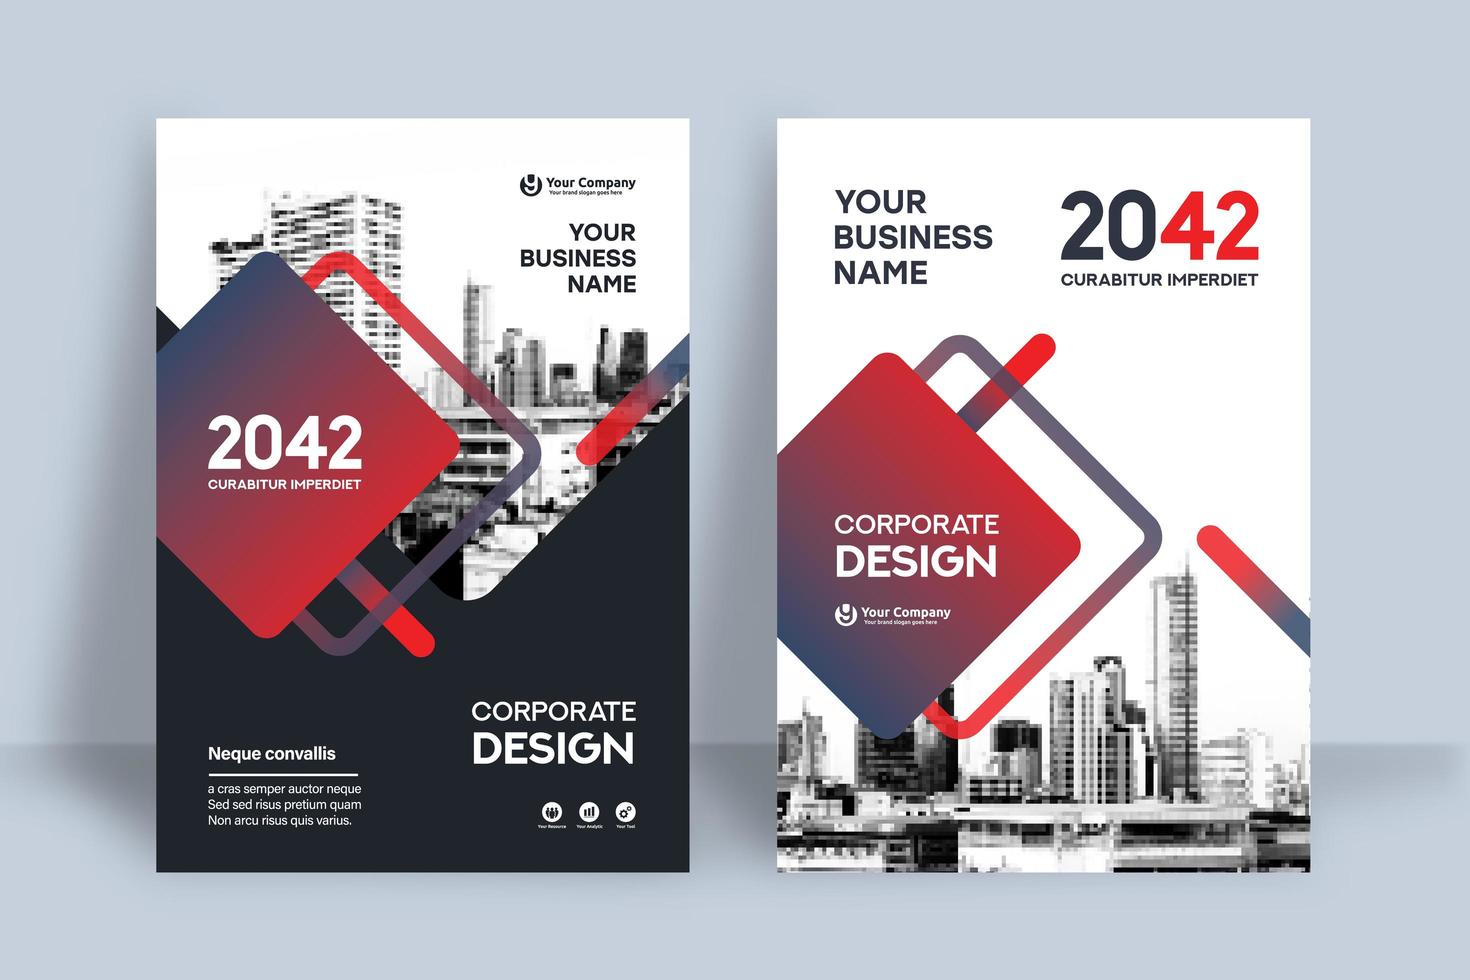 City Background Business Book Cover Design Template vector